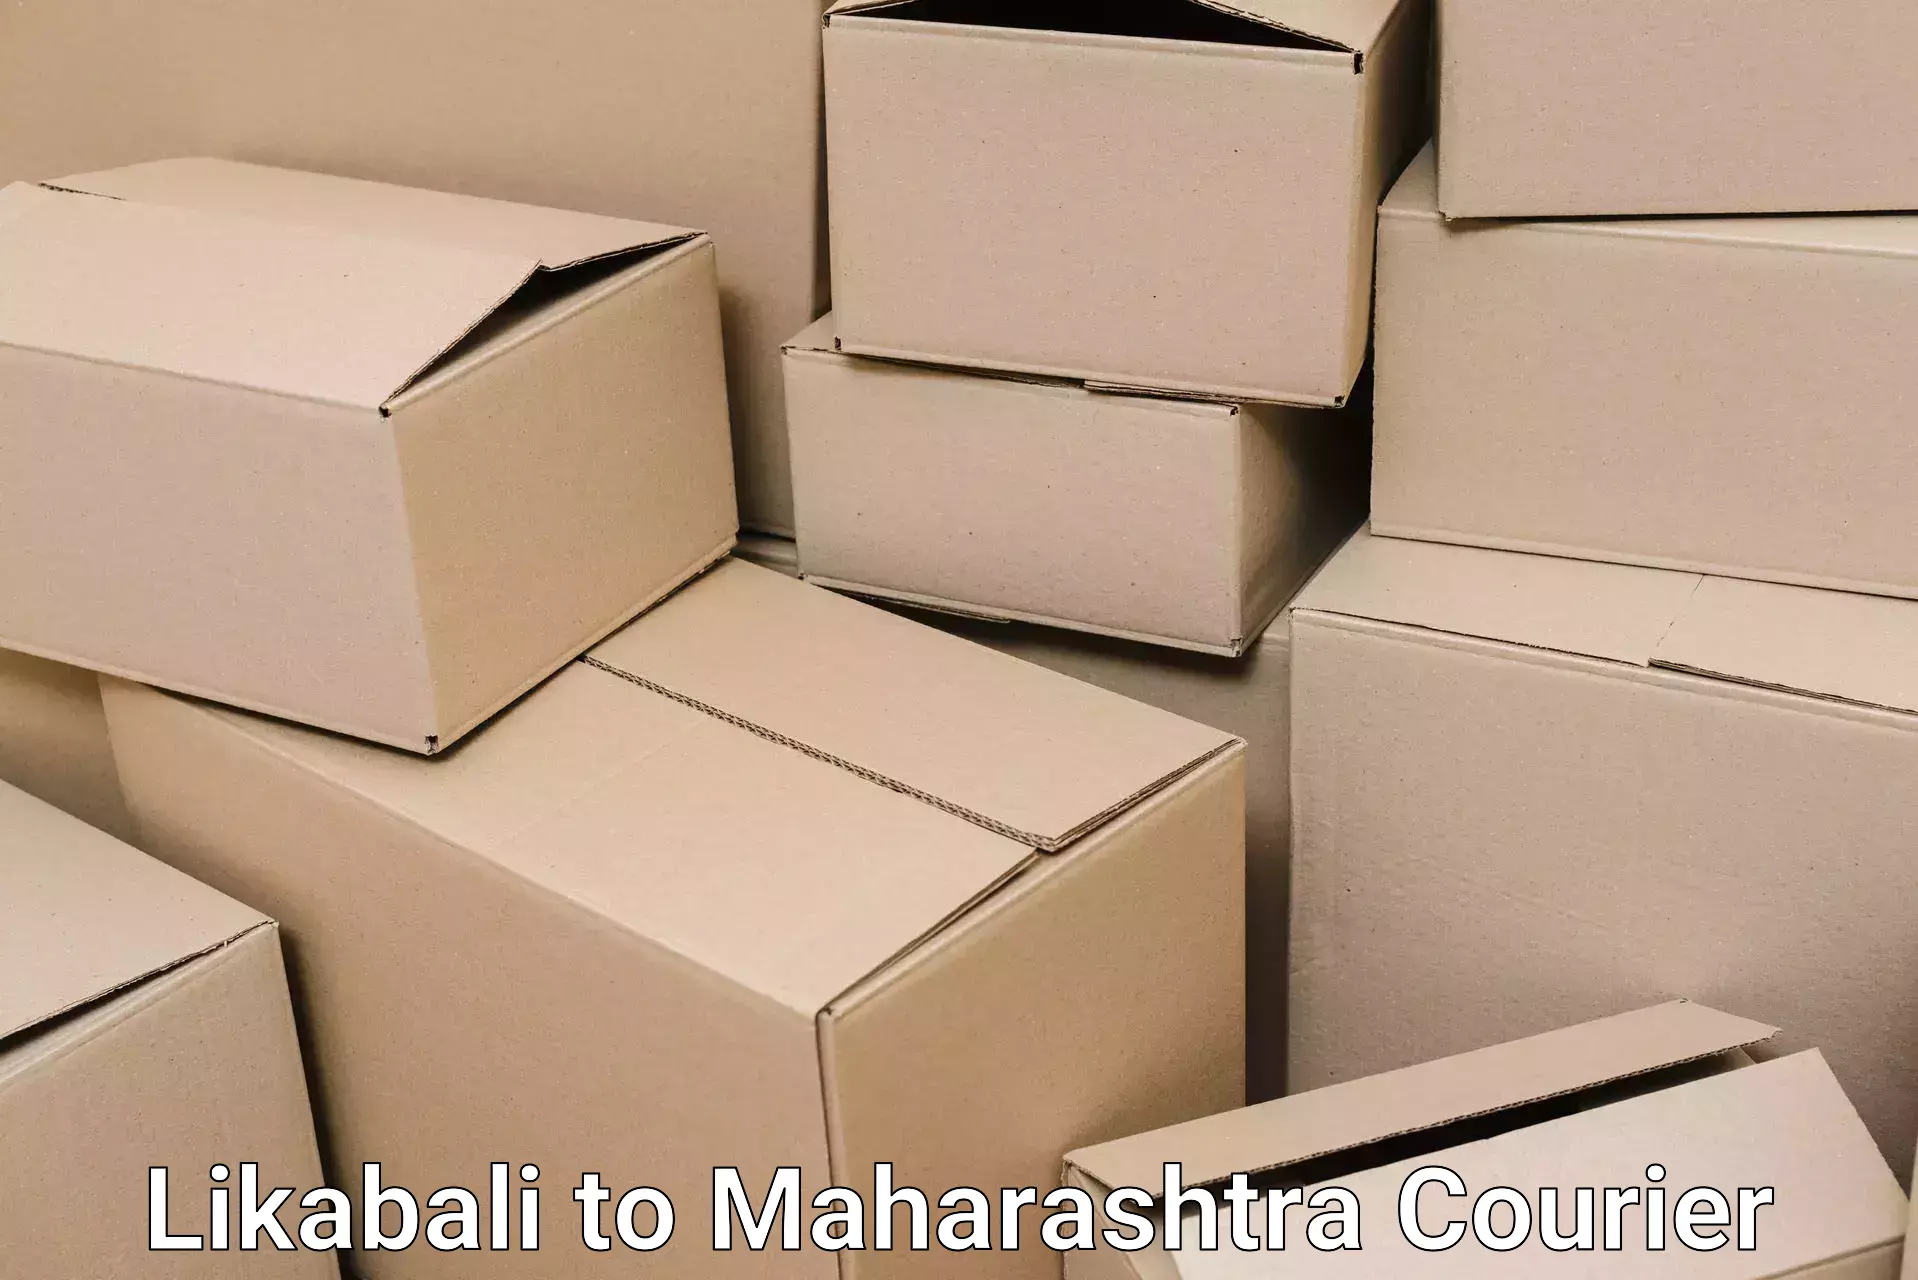 Full-service movers in Likabali to Nagpur